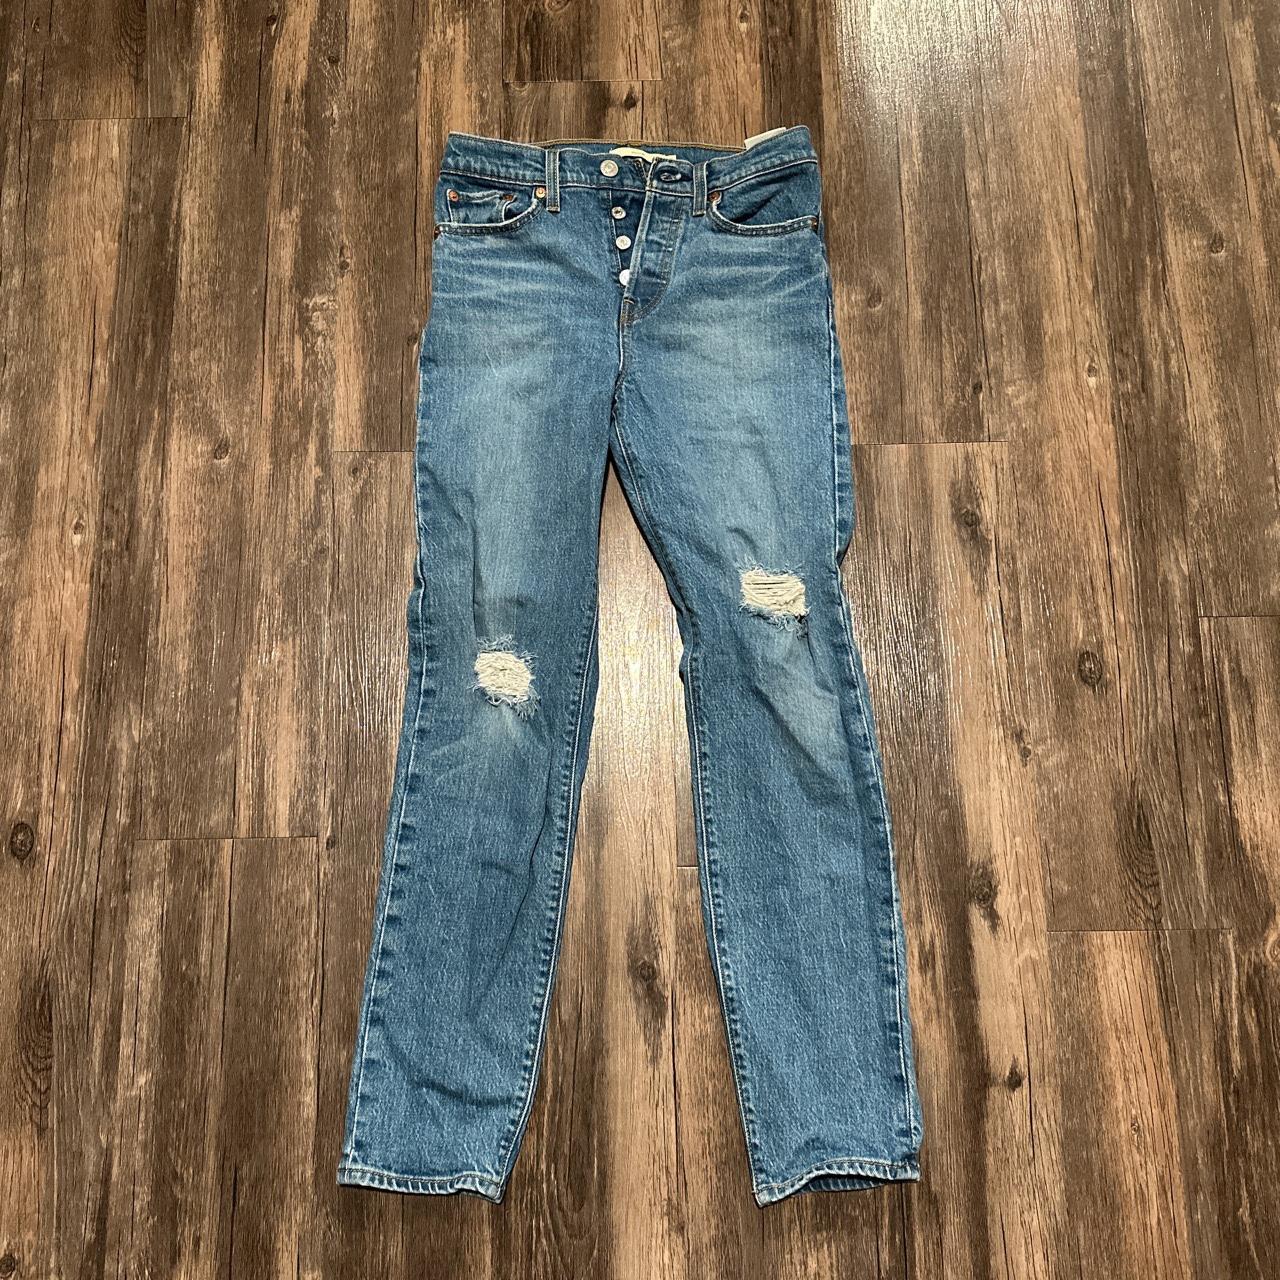 Levi Strauss Wedgie Pants Size 25 ***All Sales... - Depop